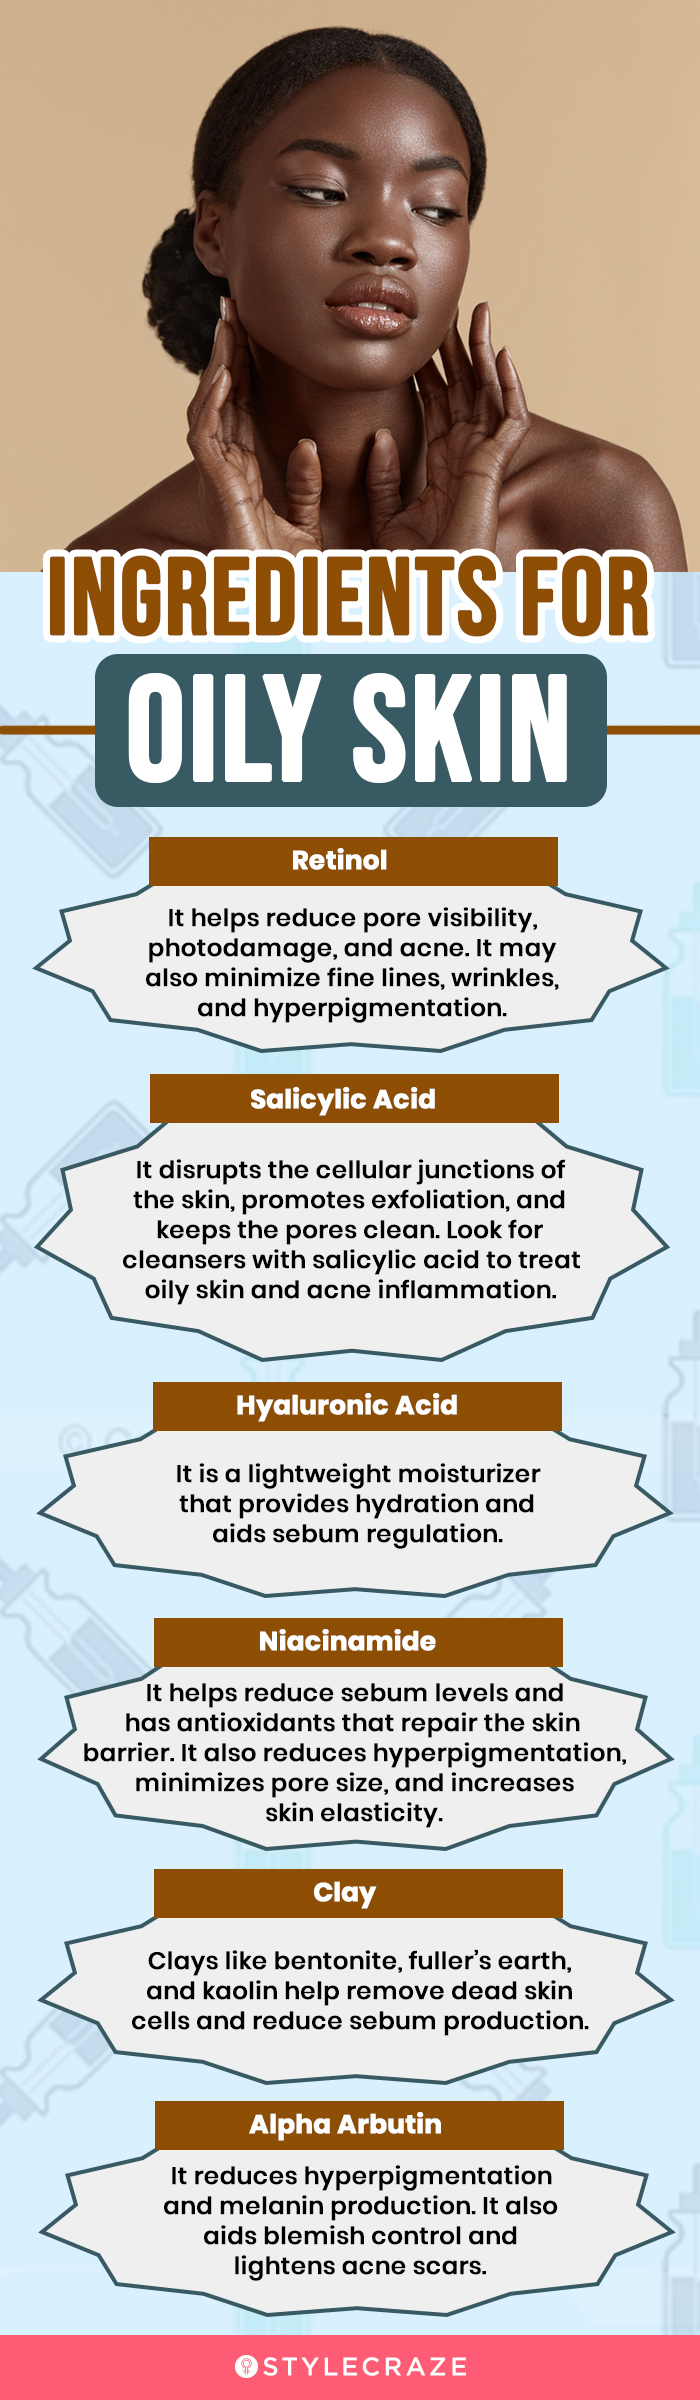 ingredients for oily skin (infographic)